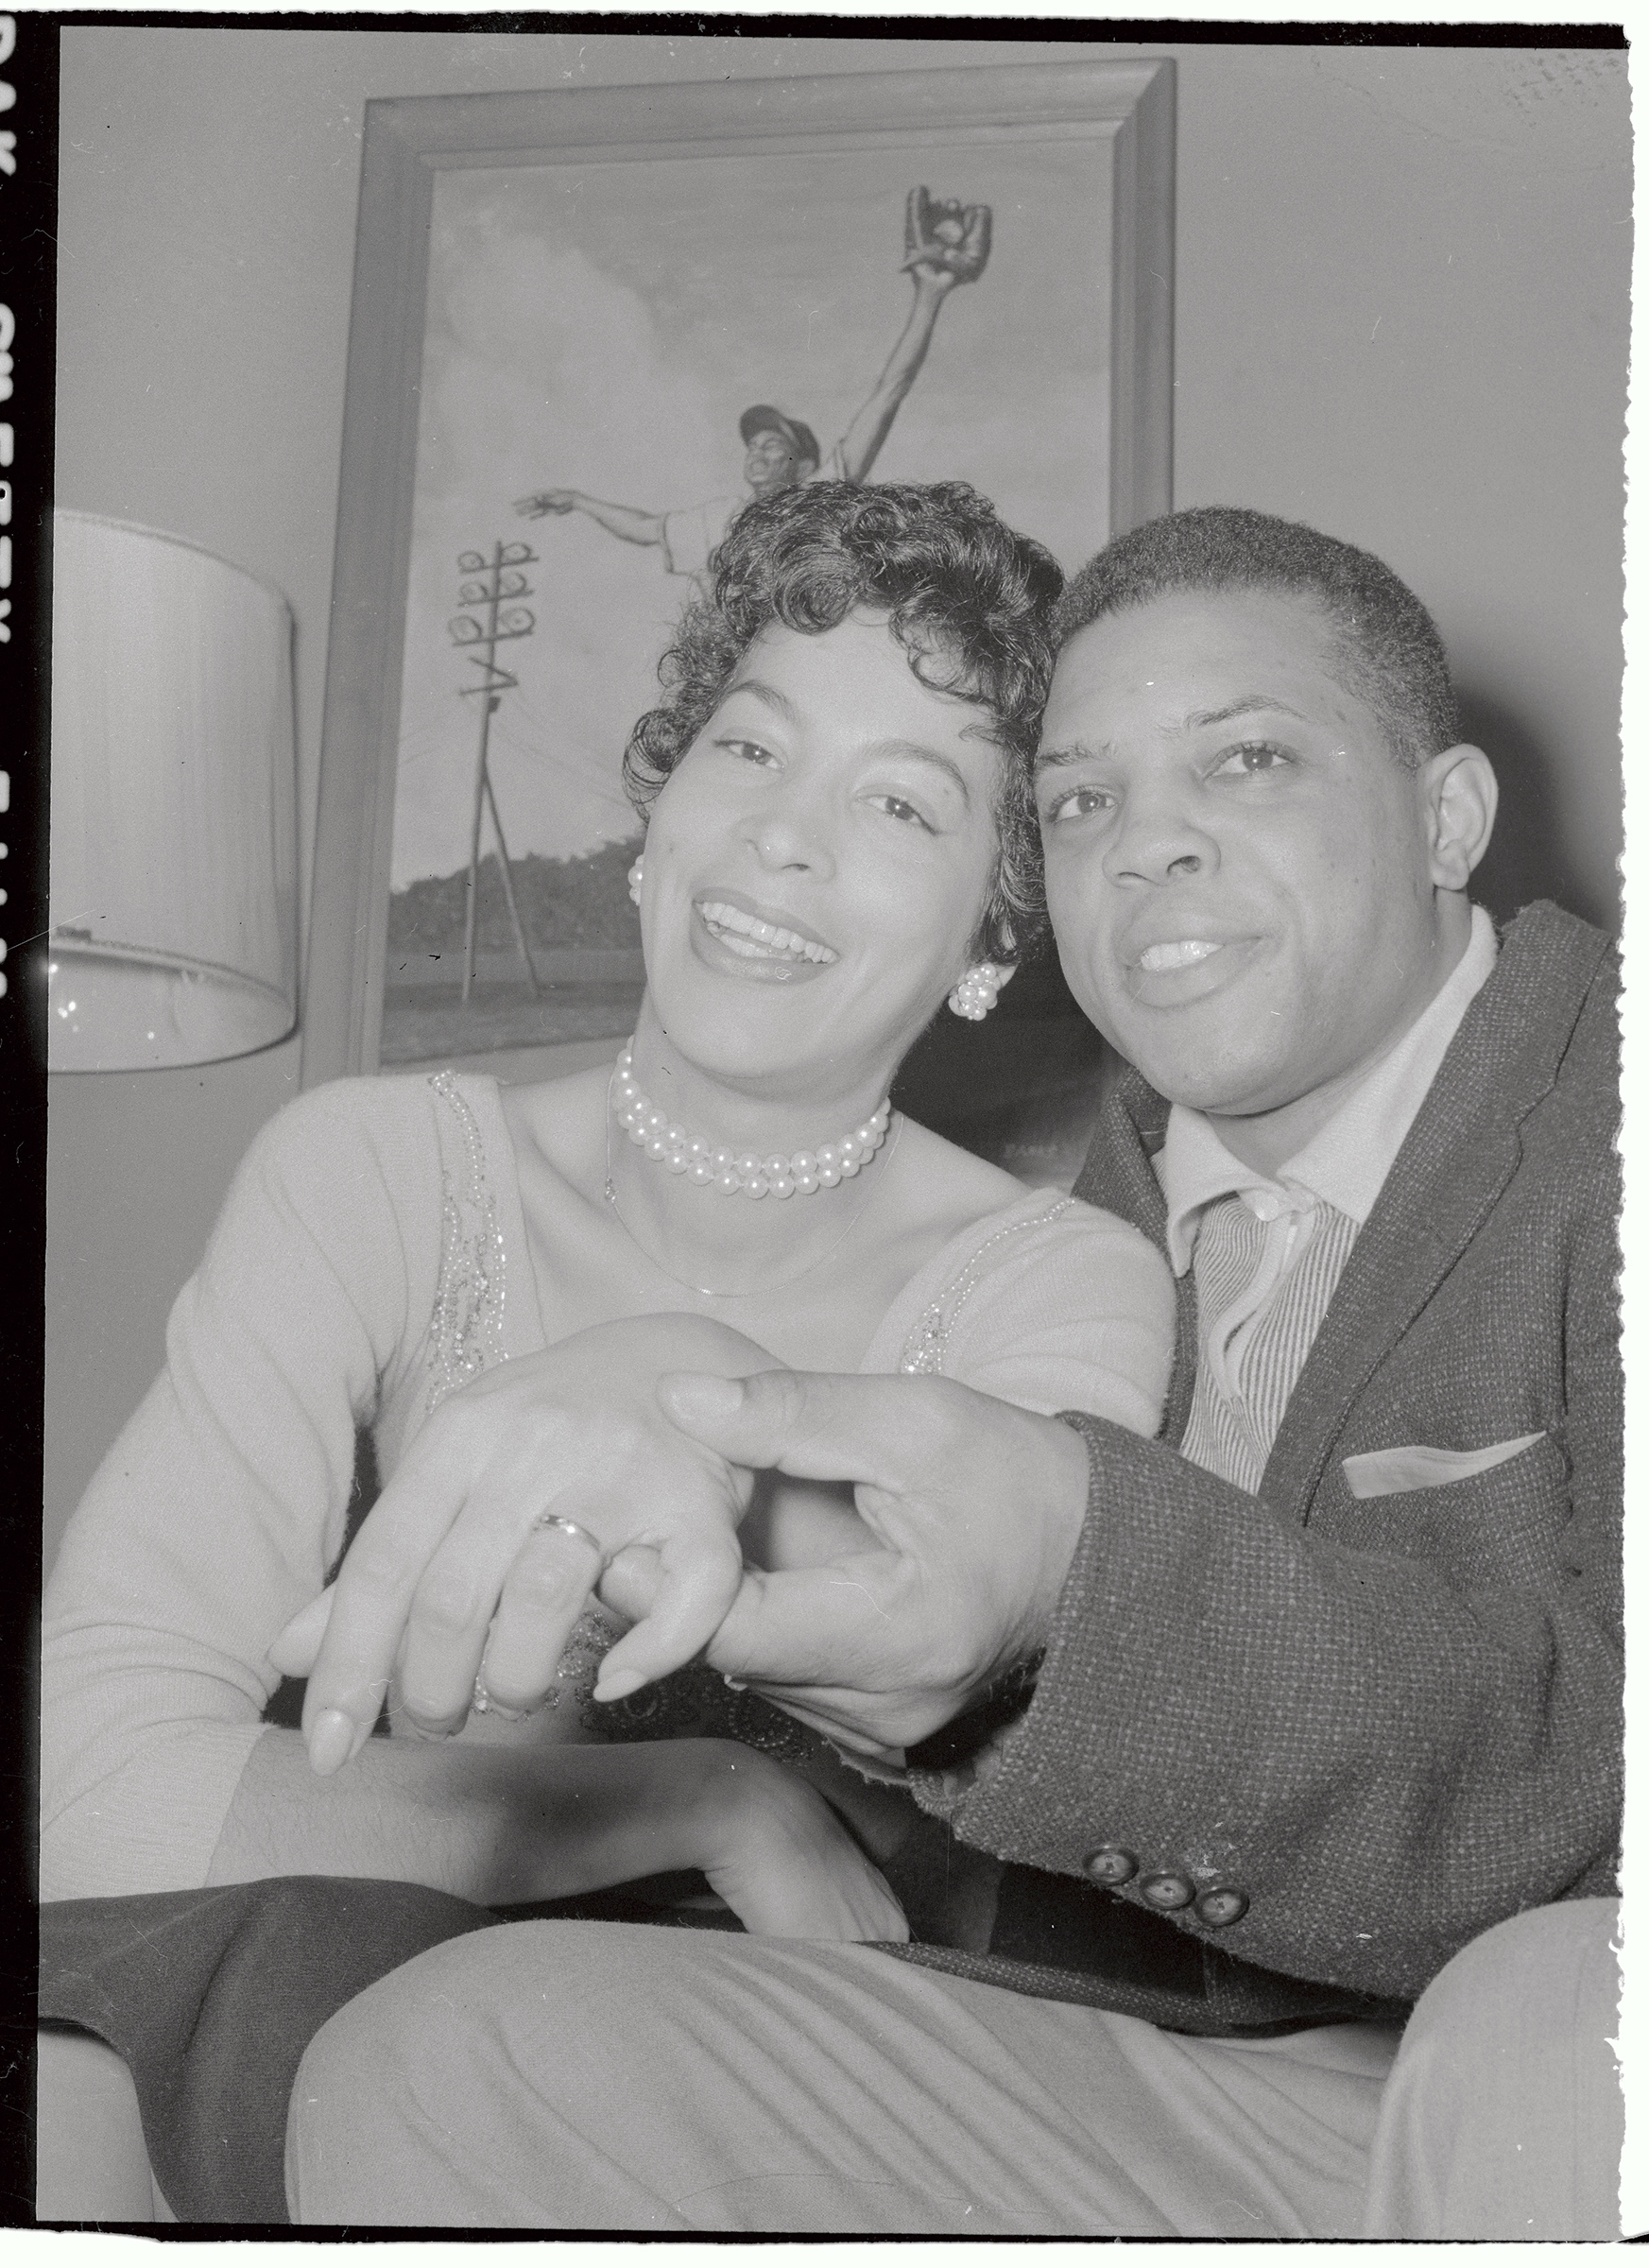 New York Giants star outfielder Willie Mays, 25, is shown with his bride of a few hours, Marguerite Wendelle, 27, at her home in Elmhurst, N.Y. after their wedding in Elkton, Md. on Feb. 14, 1956. En route to Elkton, Mays was arrested for driving 70 miles an hour on the New Jersey turnpike and paid a $15 fine.